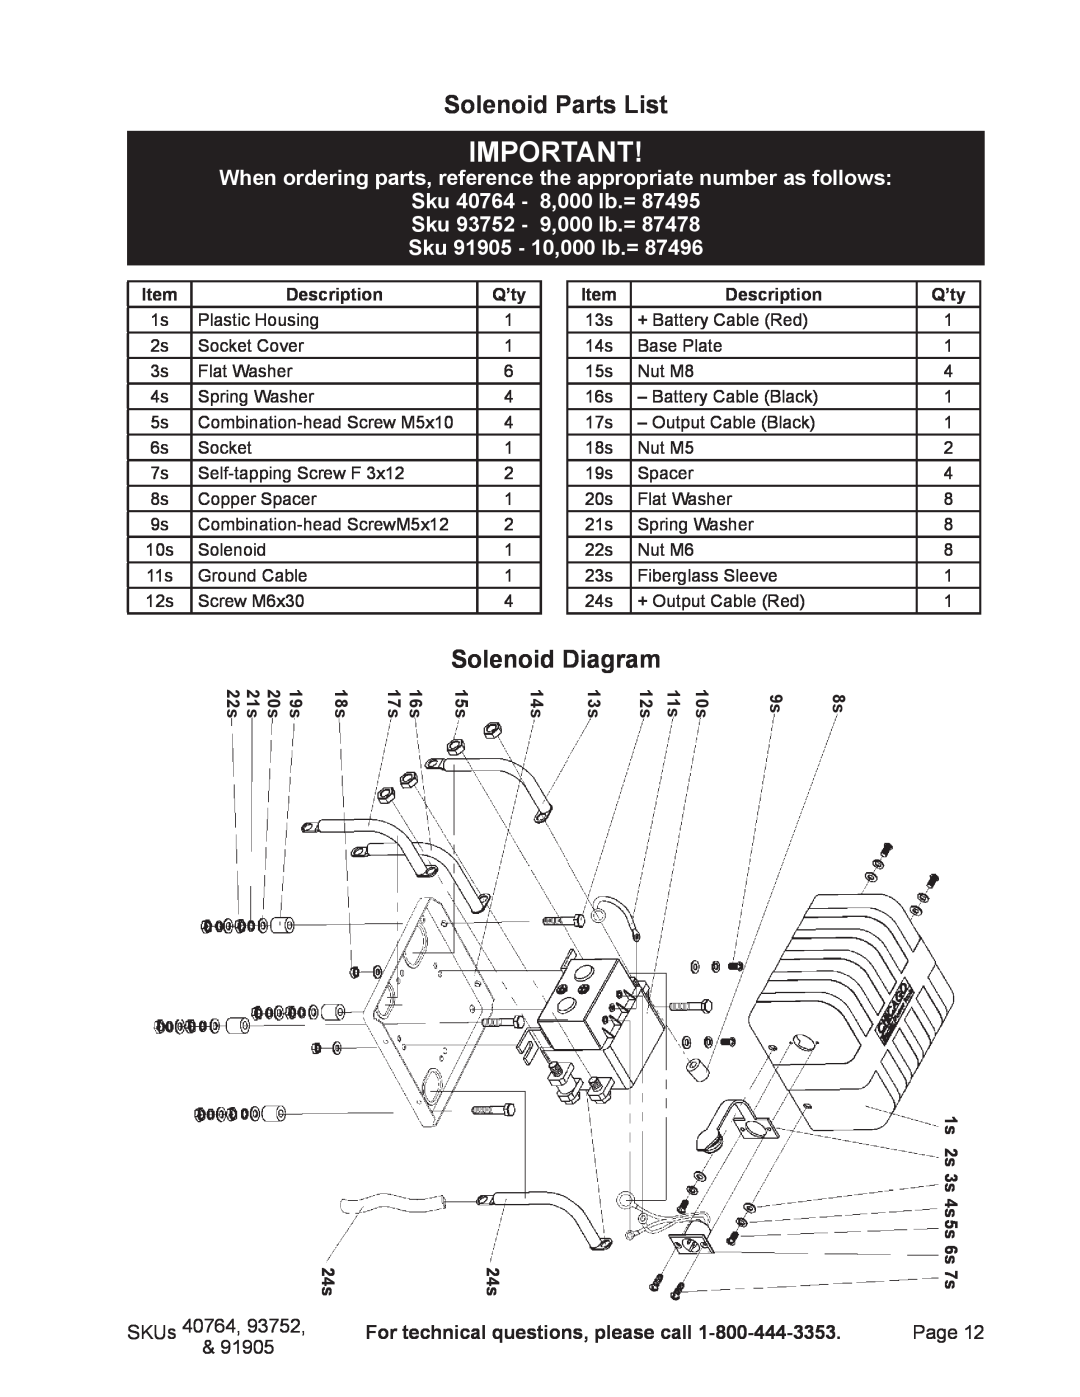 Chicago Electric 93752, 40764 manual Solenoid Parts List, Solenoid Diagram, SKUs, For technical questions, please call, Page 